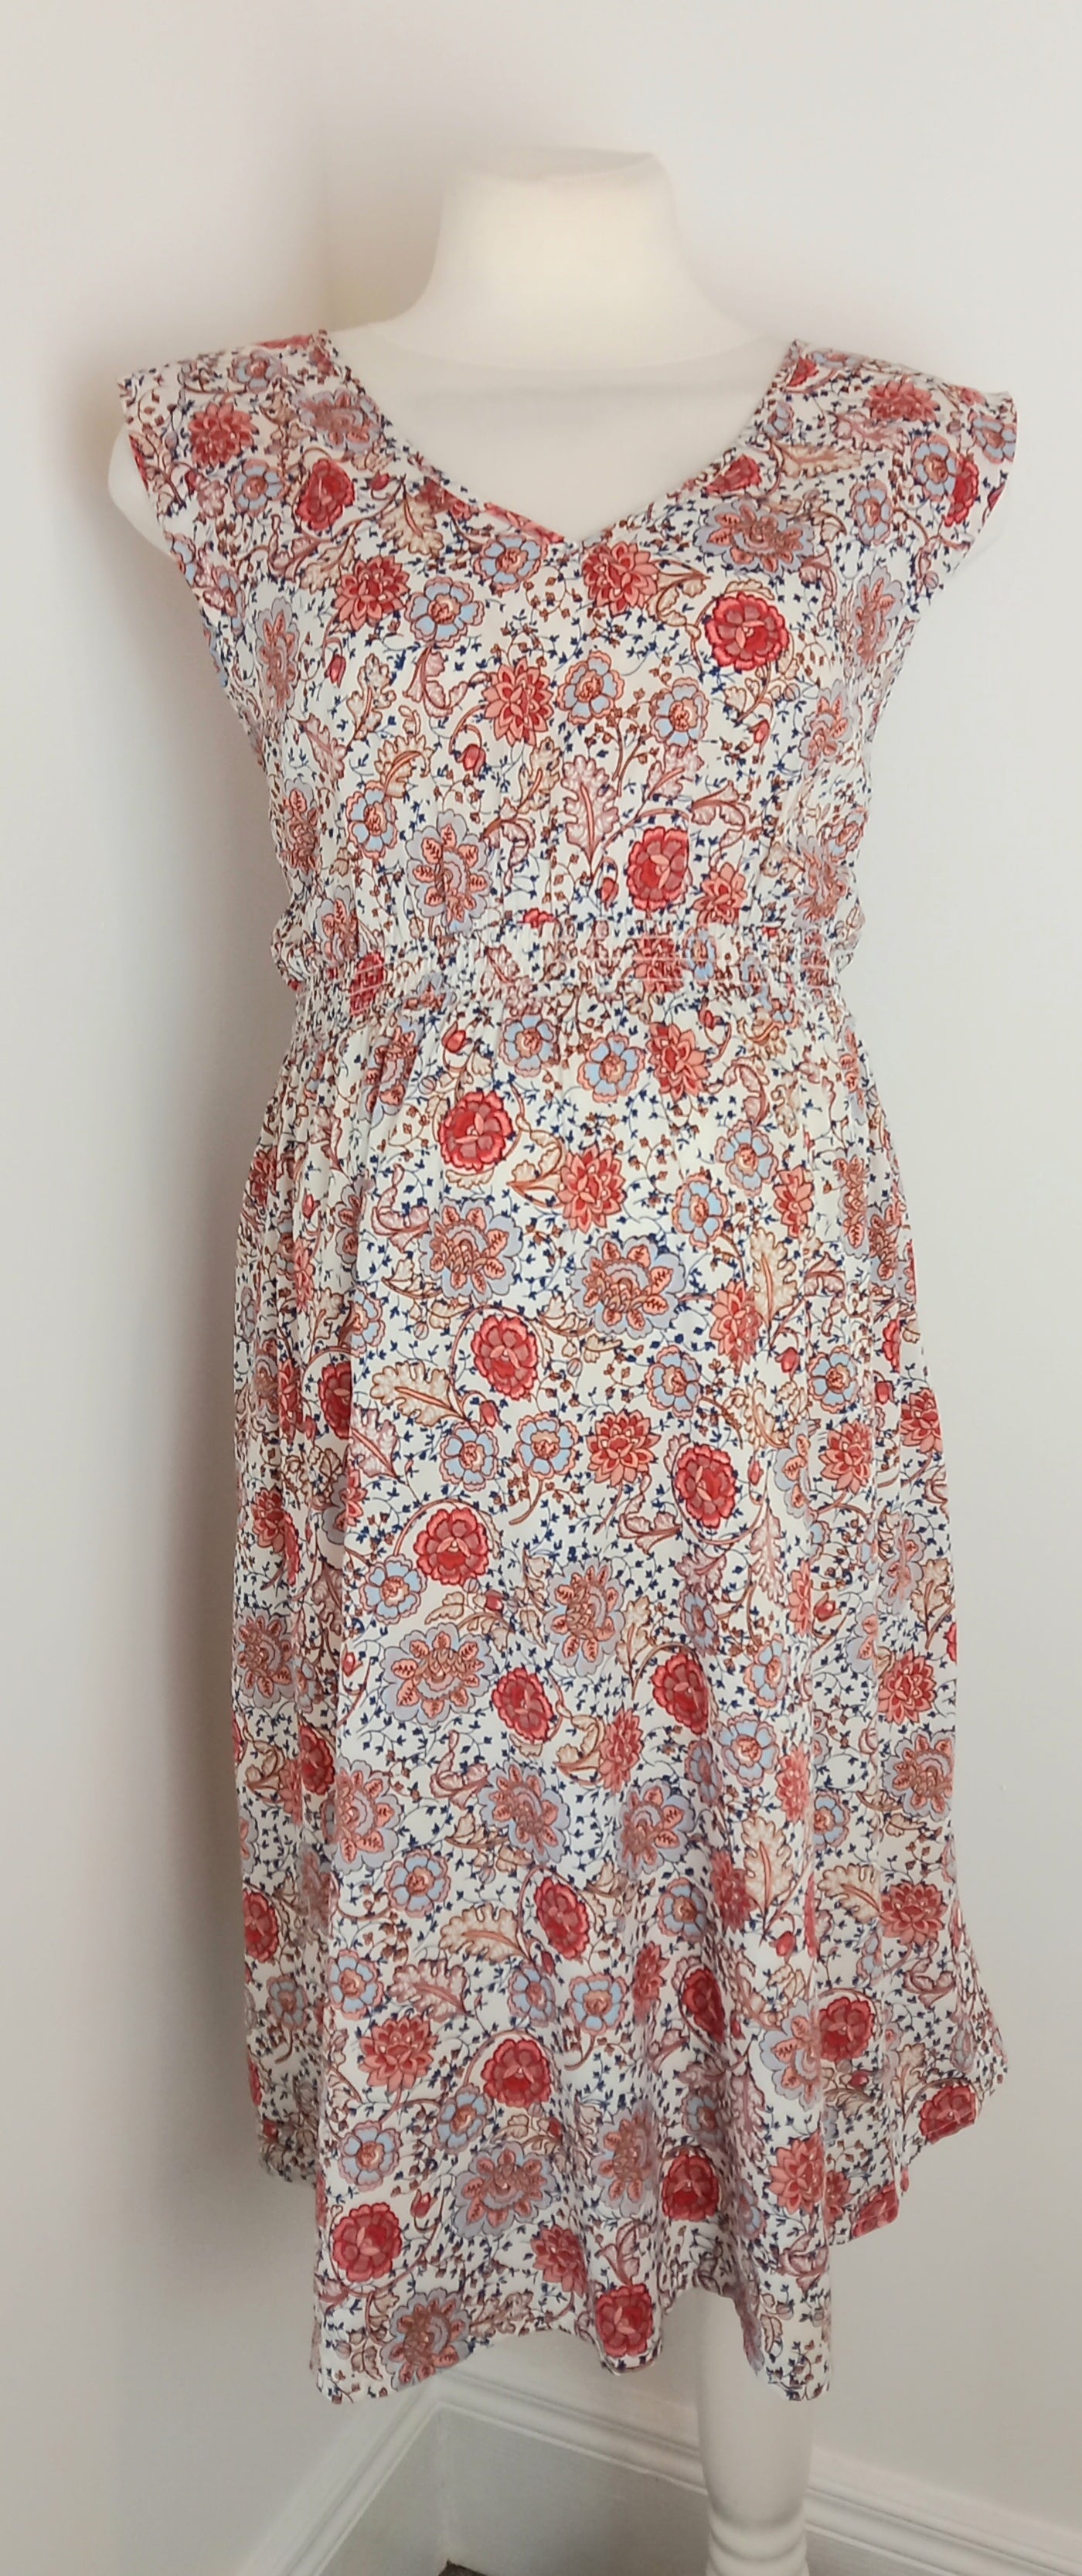 New Look Maternity White, Orange & Blue Floral Summer Dress - Size 14